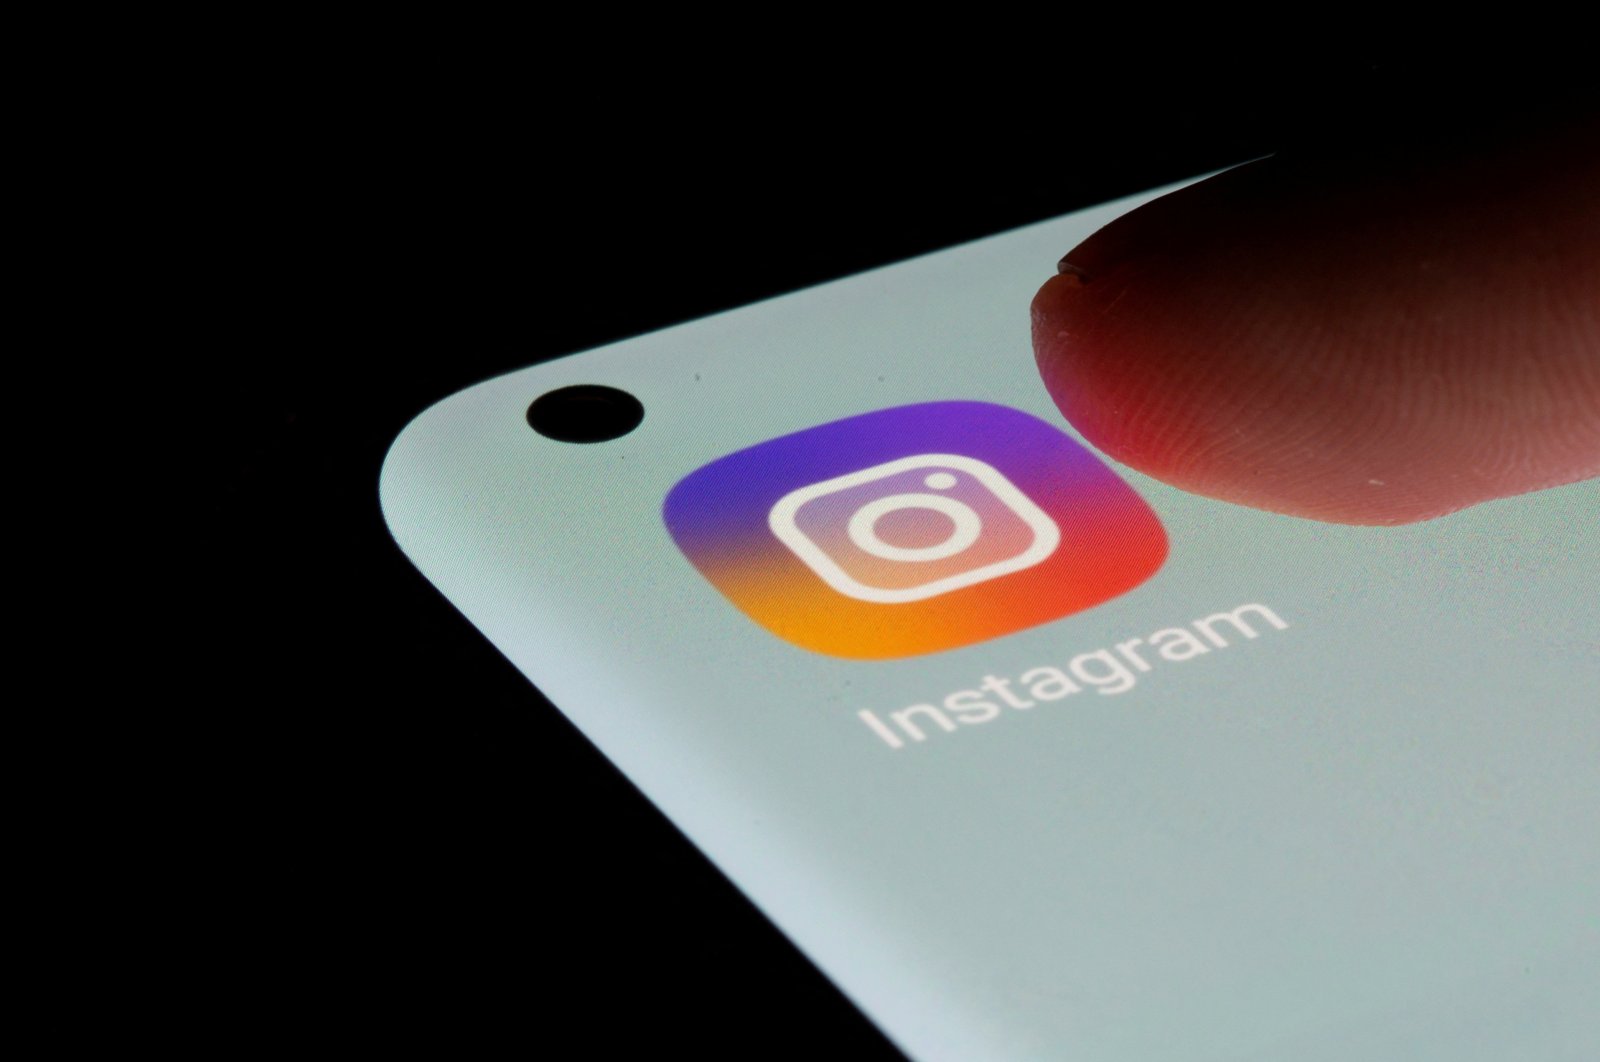 An Instagram app icon is seen on a smartphone in this illustration taken on July 13, 2021. (Reuters Photo)